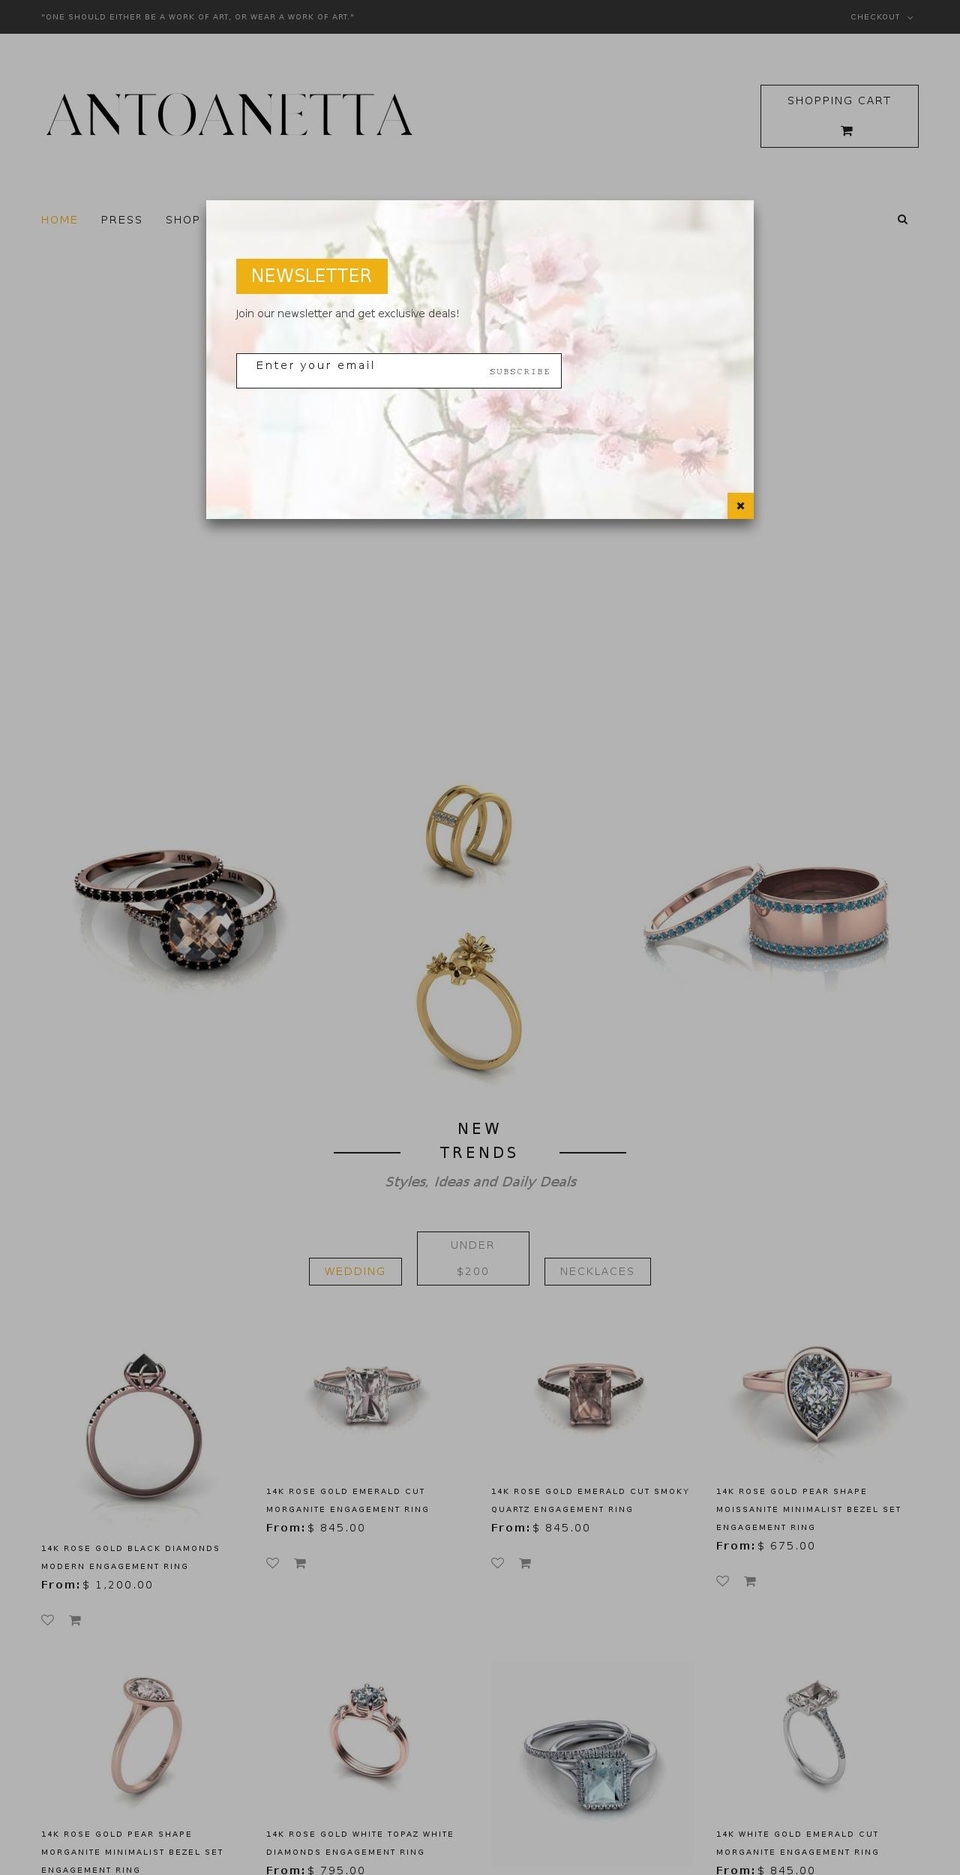 Expression Shopify theme site example antoanetta.com